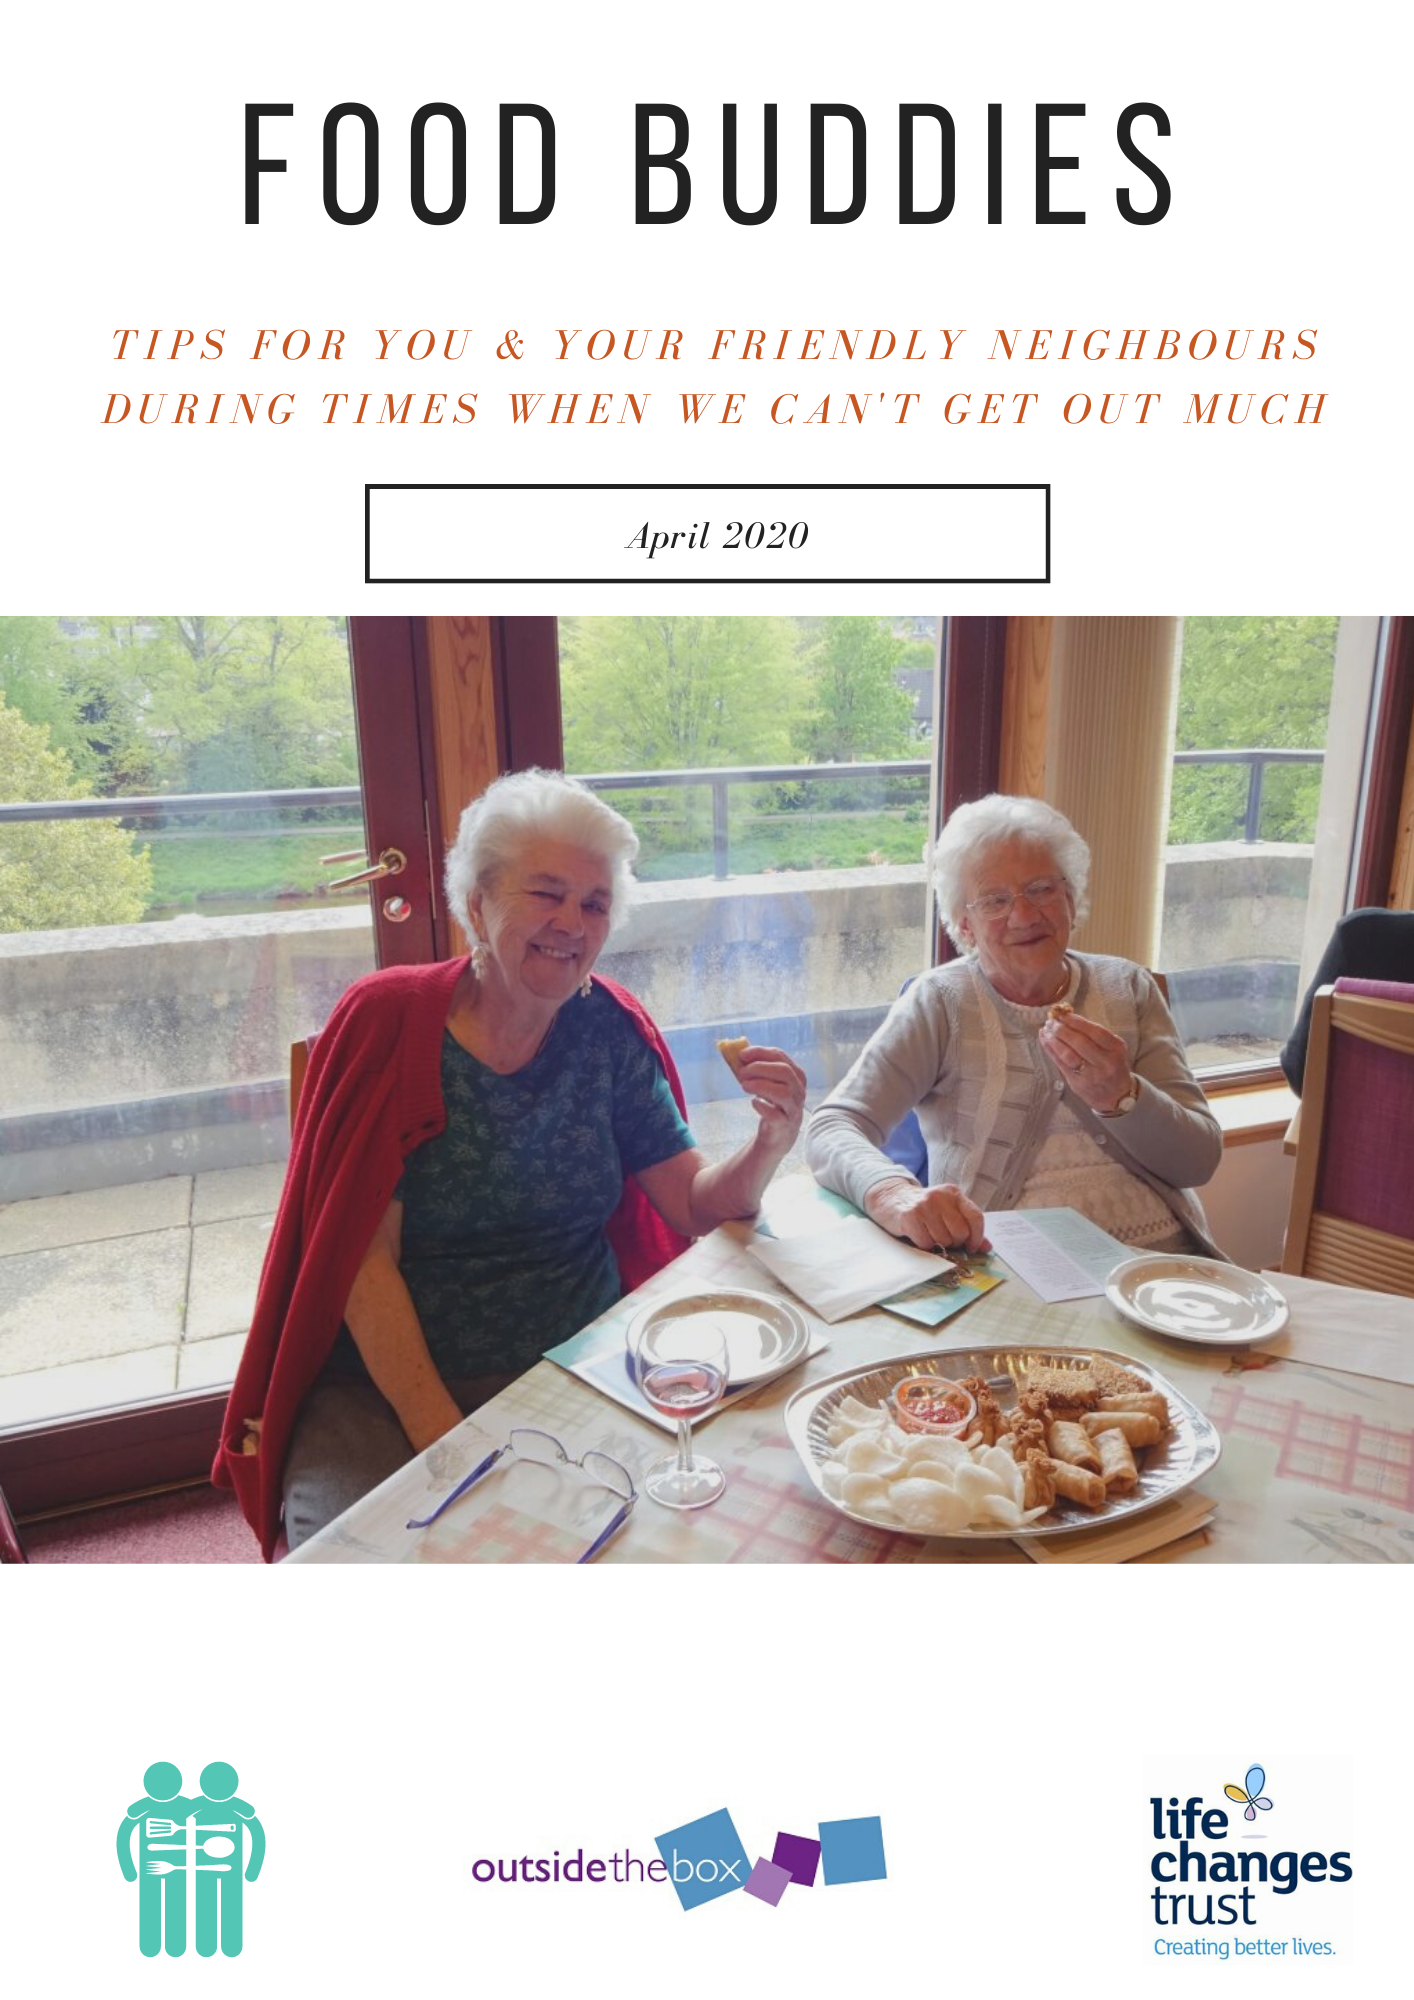 Food Buddies tips for friendly neighbours at times when we can't get out much